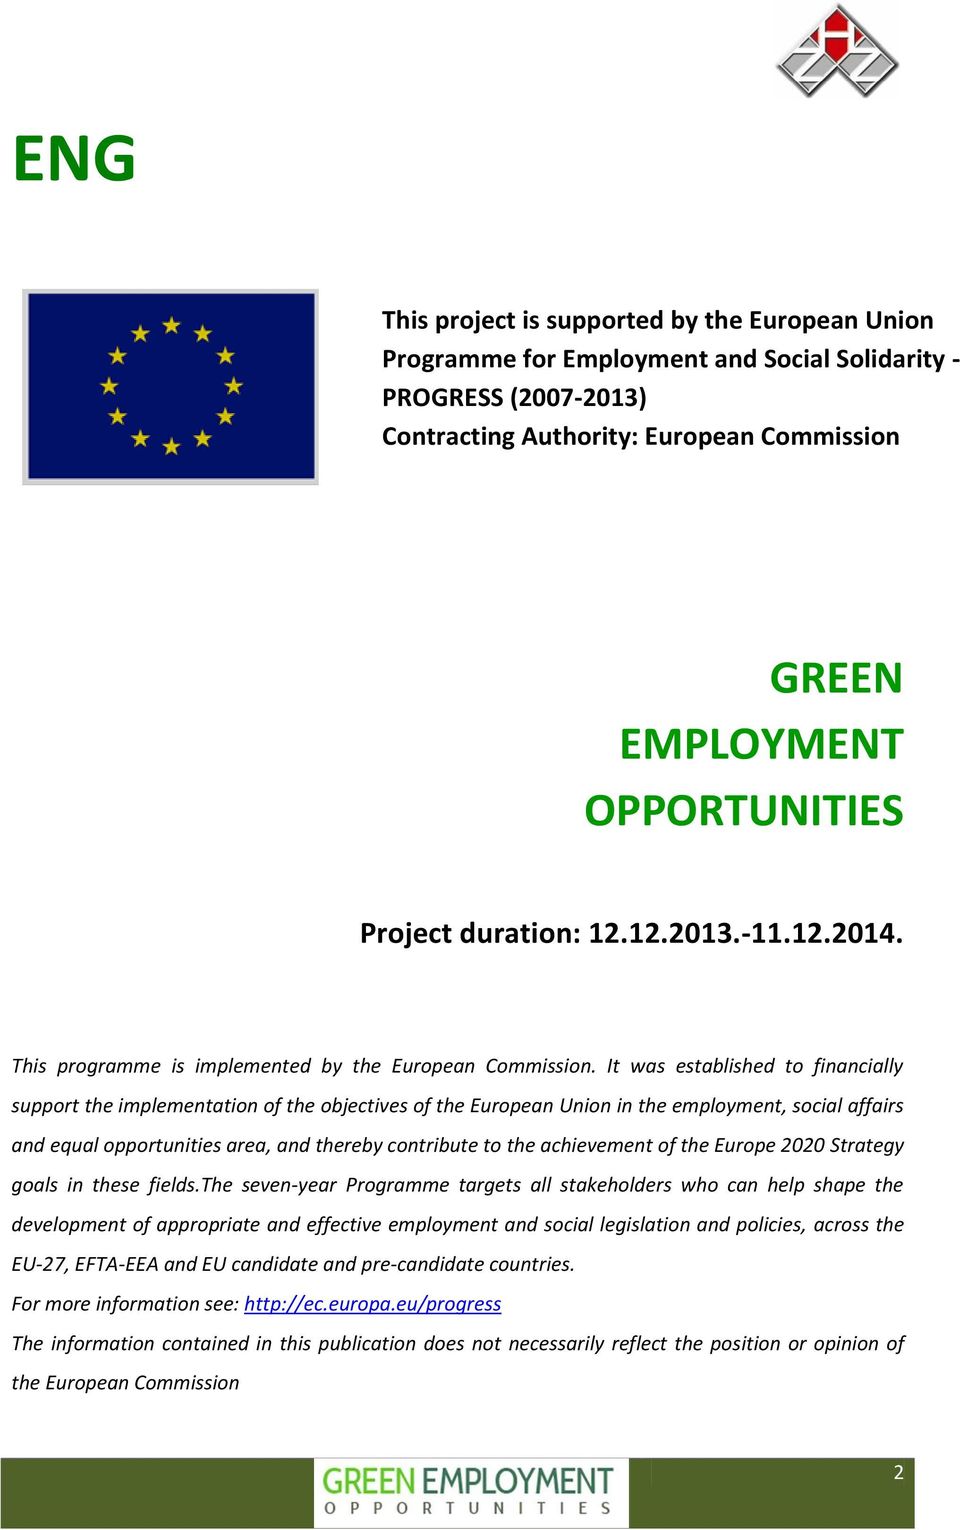 It was established to financially support the implementation of the objectives of the European Union in the employment, social affairs and equal opportunities area, and thereby contribute to the